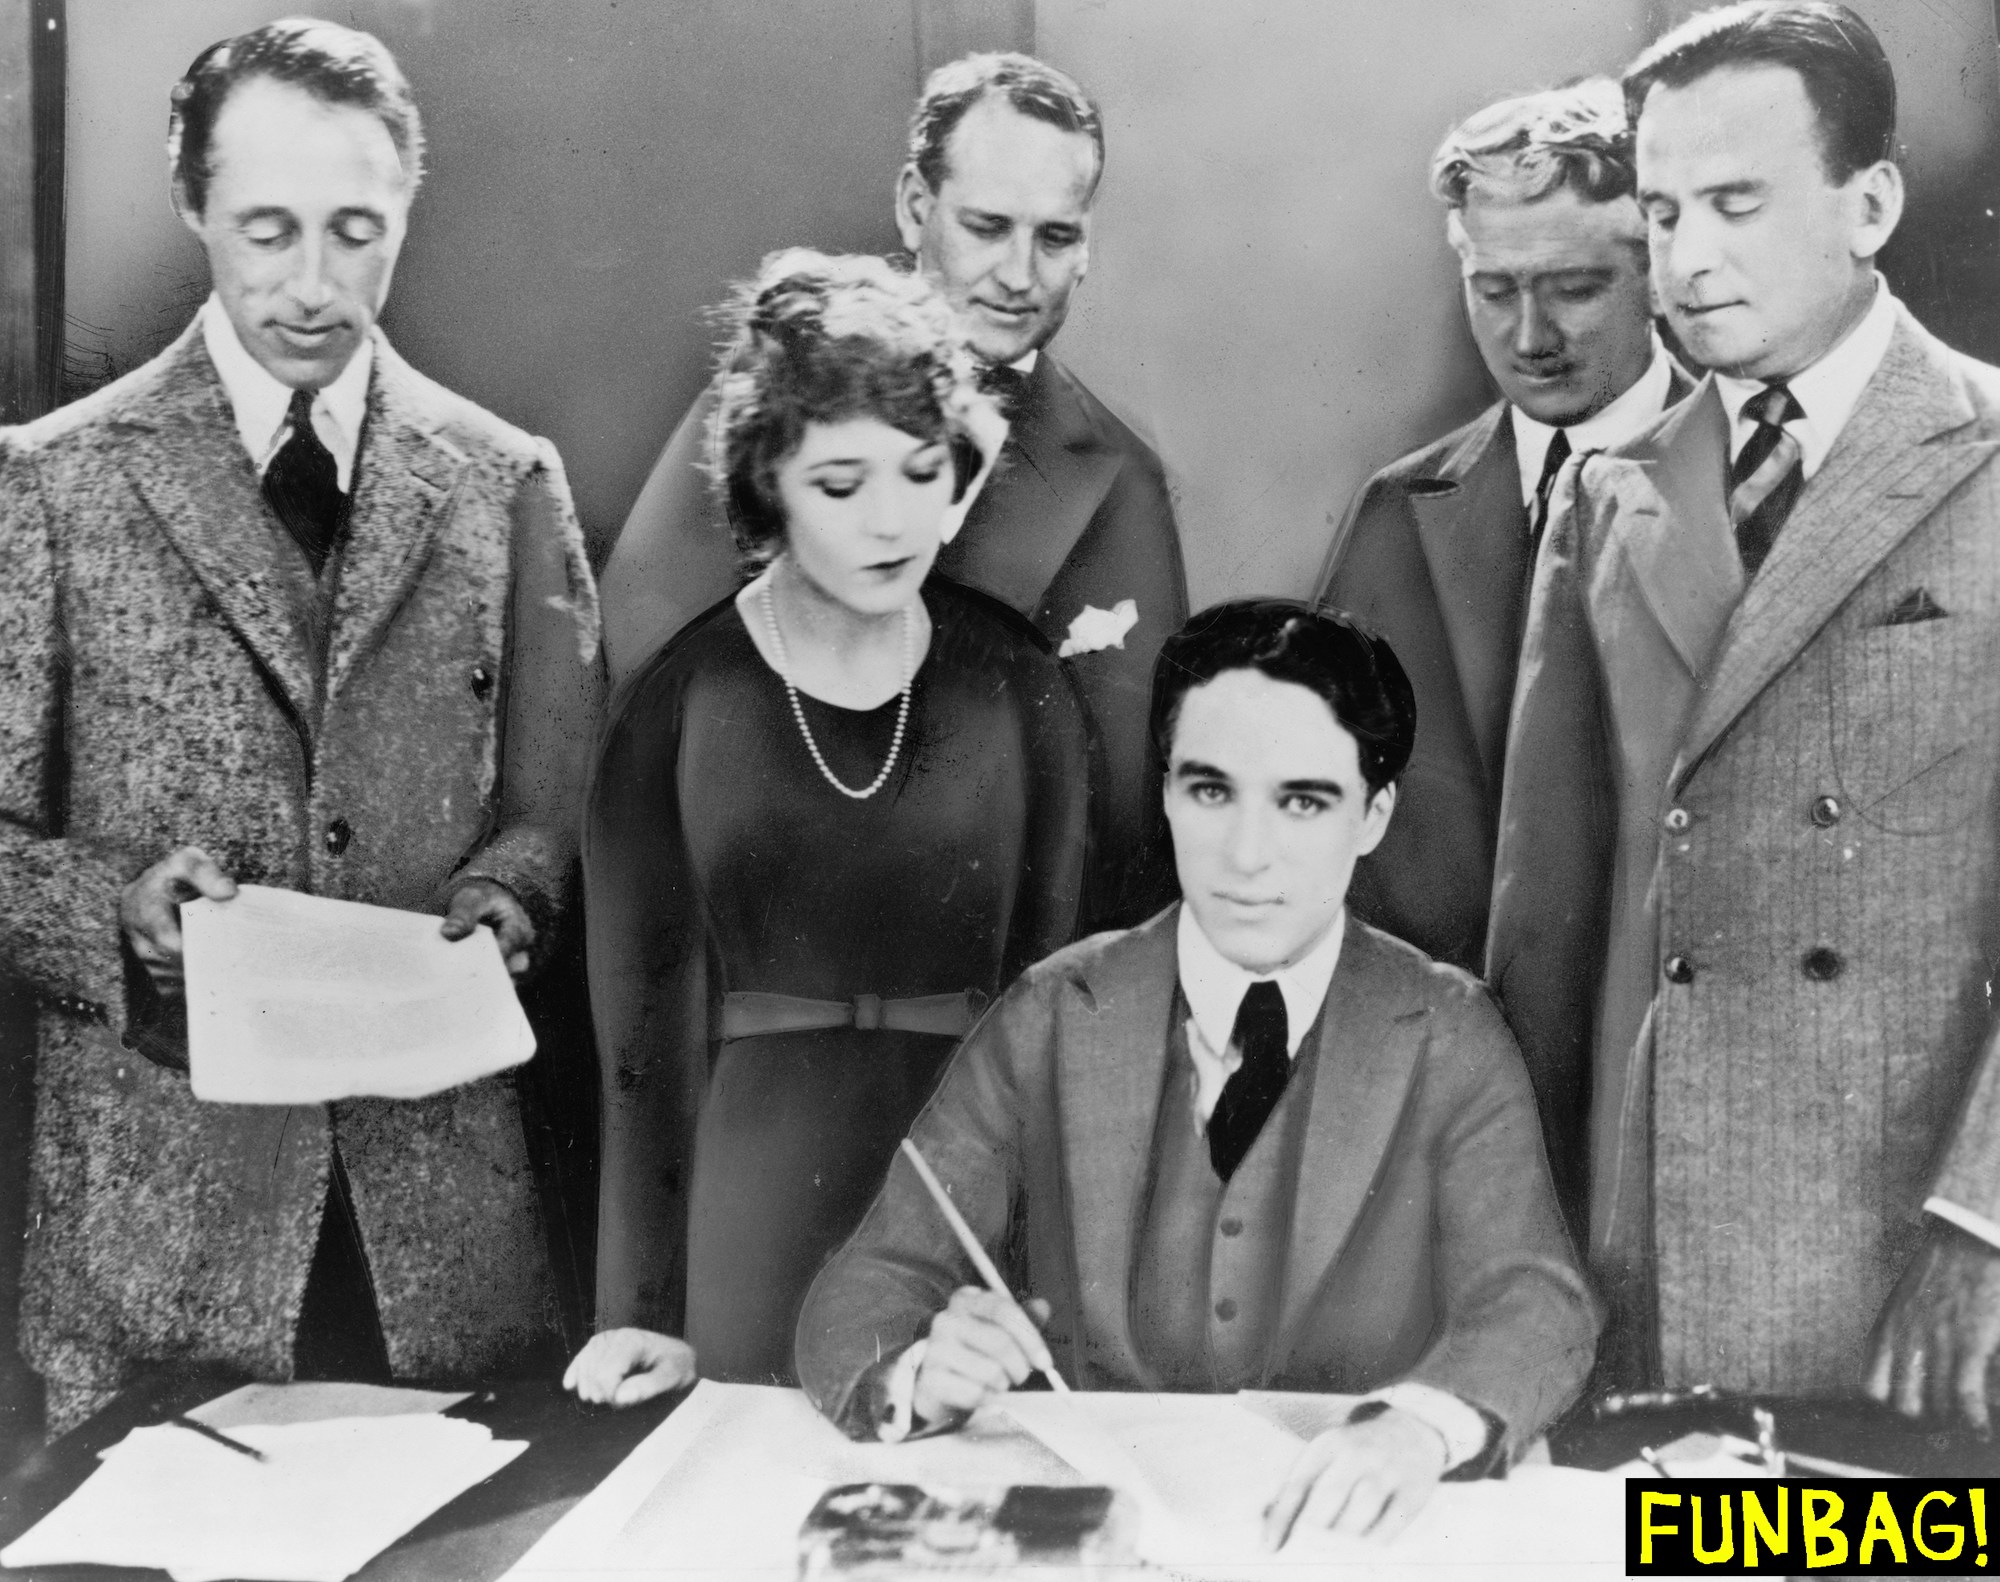 DW Griffith, Mary Pickford, Charlie Chaplin, Douglas Fairbanks signing contract establishing United Artists motion picture studio. (Photo by: Photo12/Universal Images Group via Getty Images)